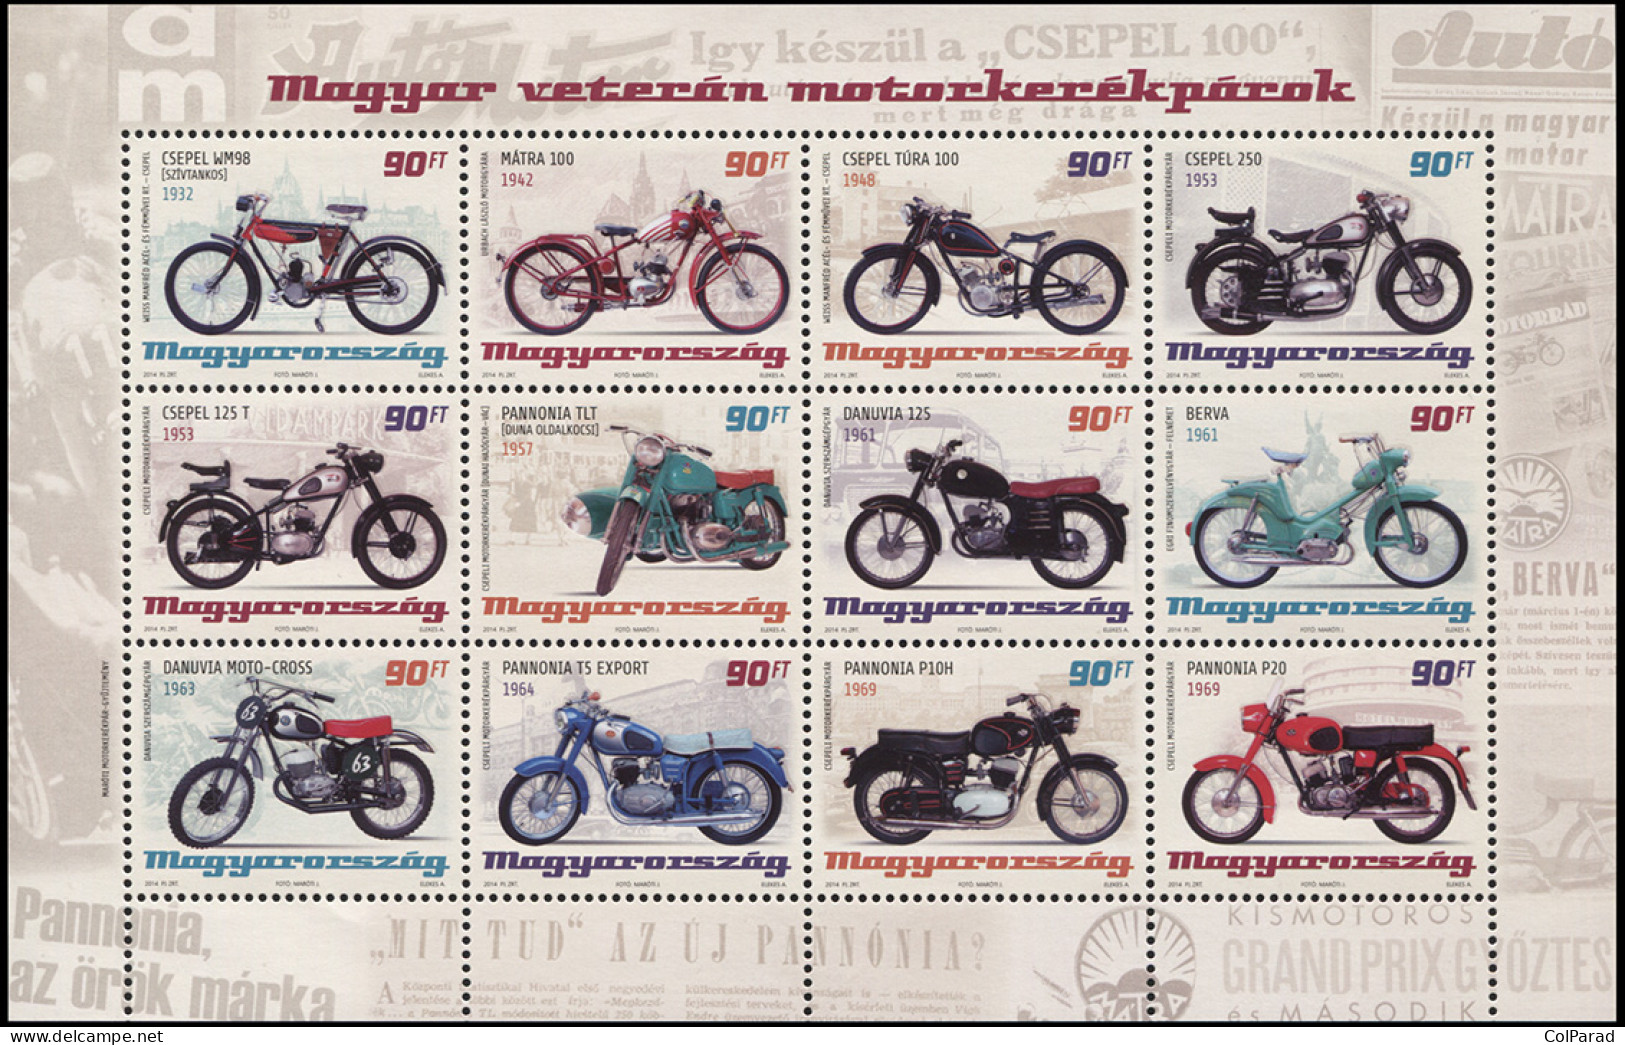 HUNGARY - 2014 - MINIATURE SHEET MNH ** - Hungarian Old-Timer Motorcycles - Unused Stamps